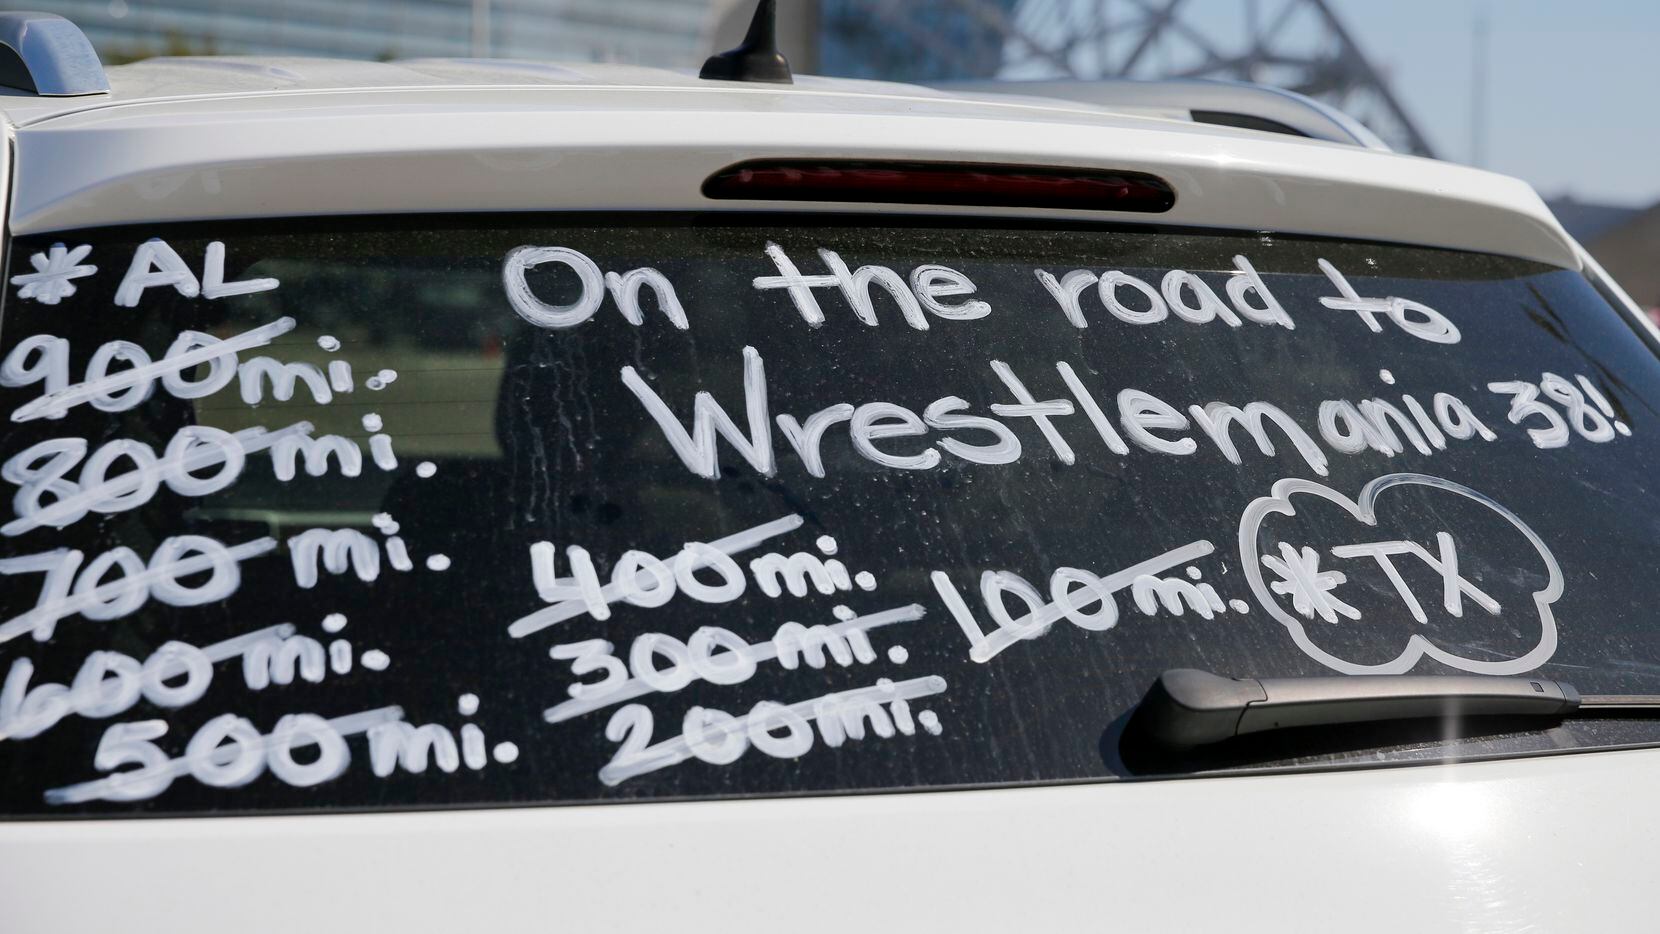 Window paint on a car documents a fan’s roadtrip outside WrestleMania 38 at AT&T Stadium.